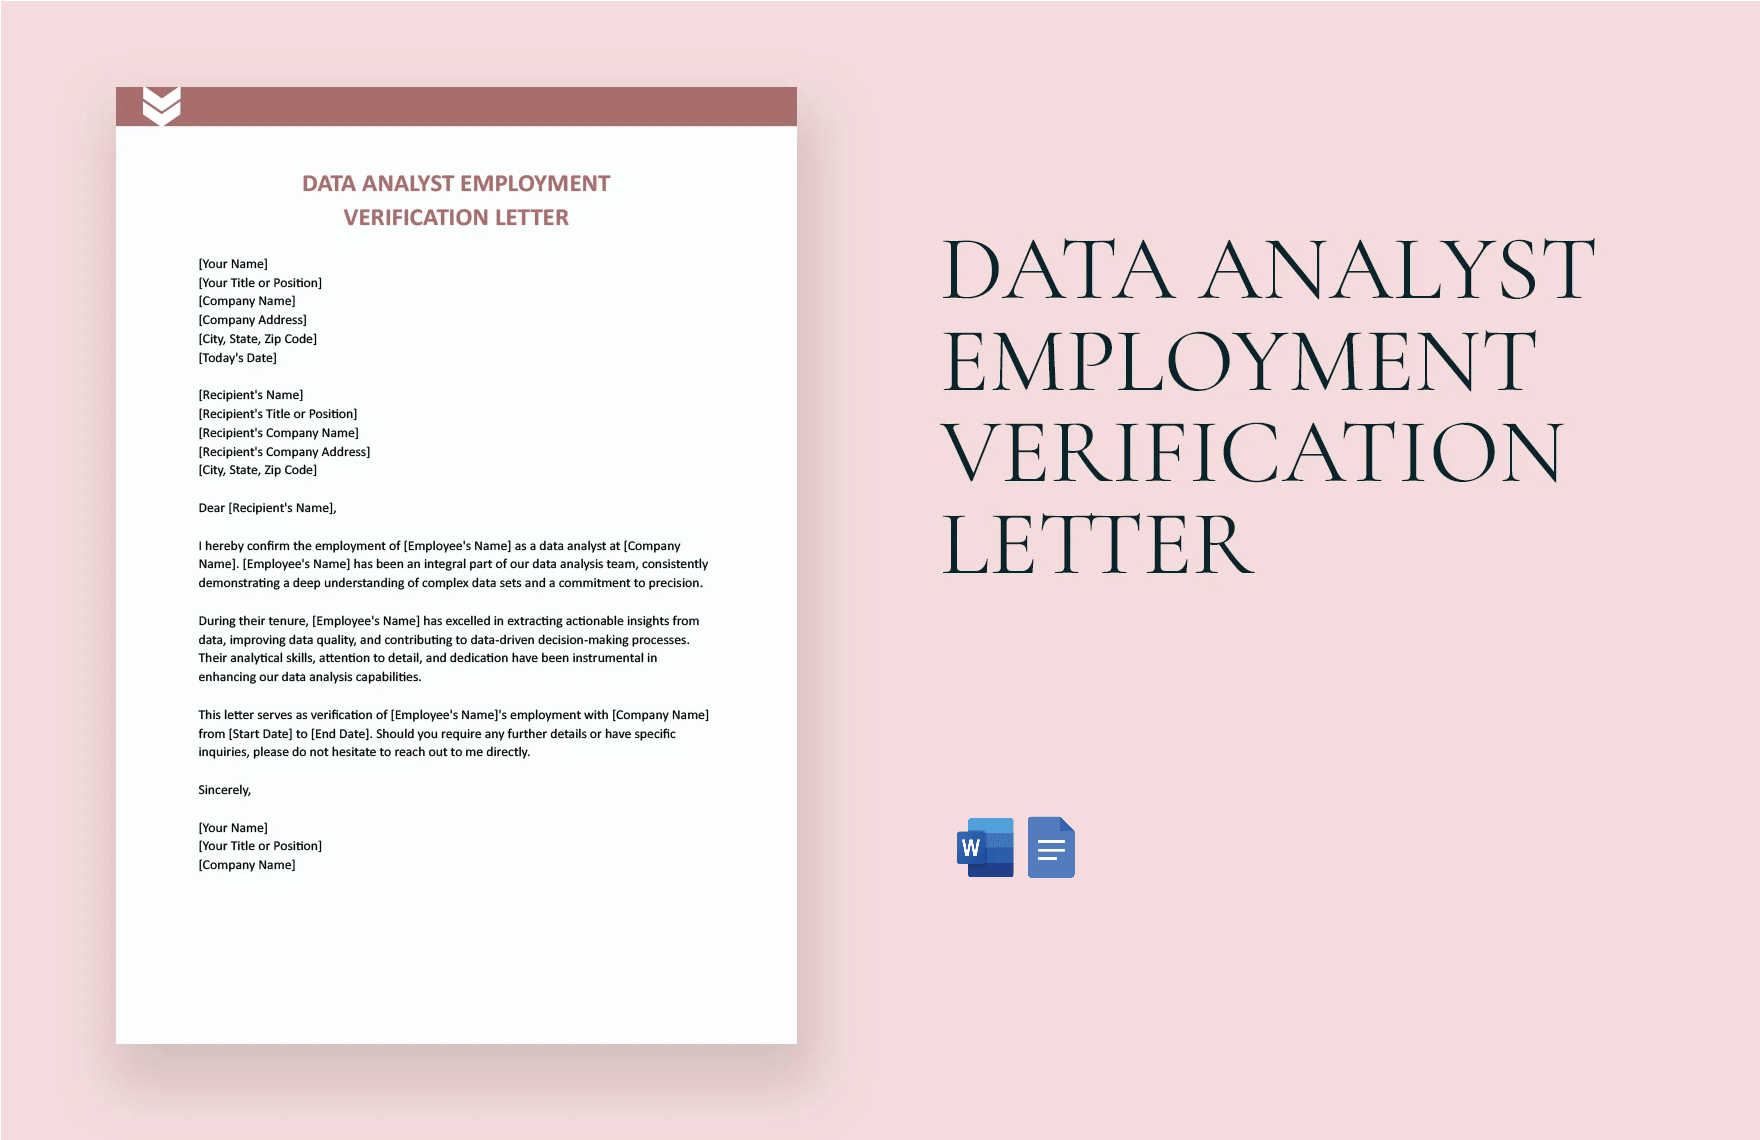 Free Data Analyst Employment Verification Letter in Word, Google Docs